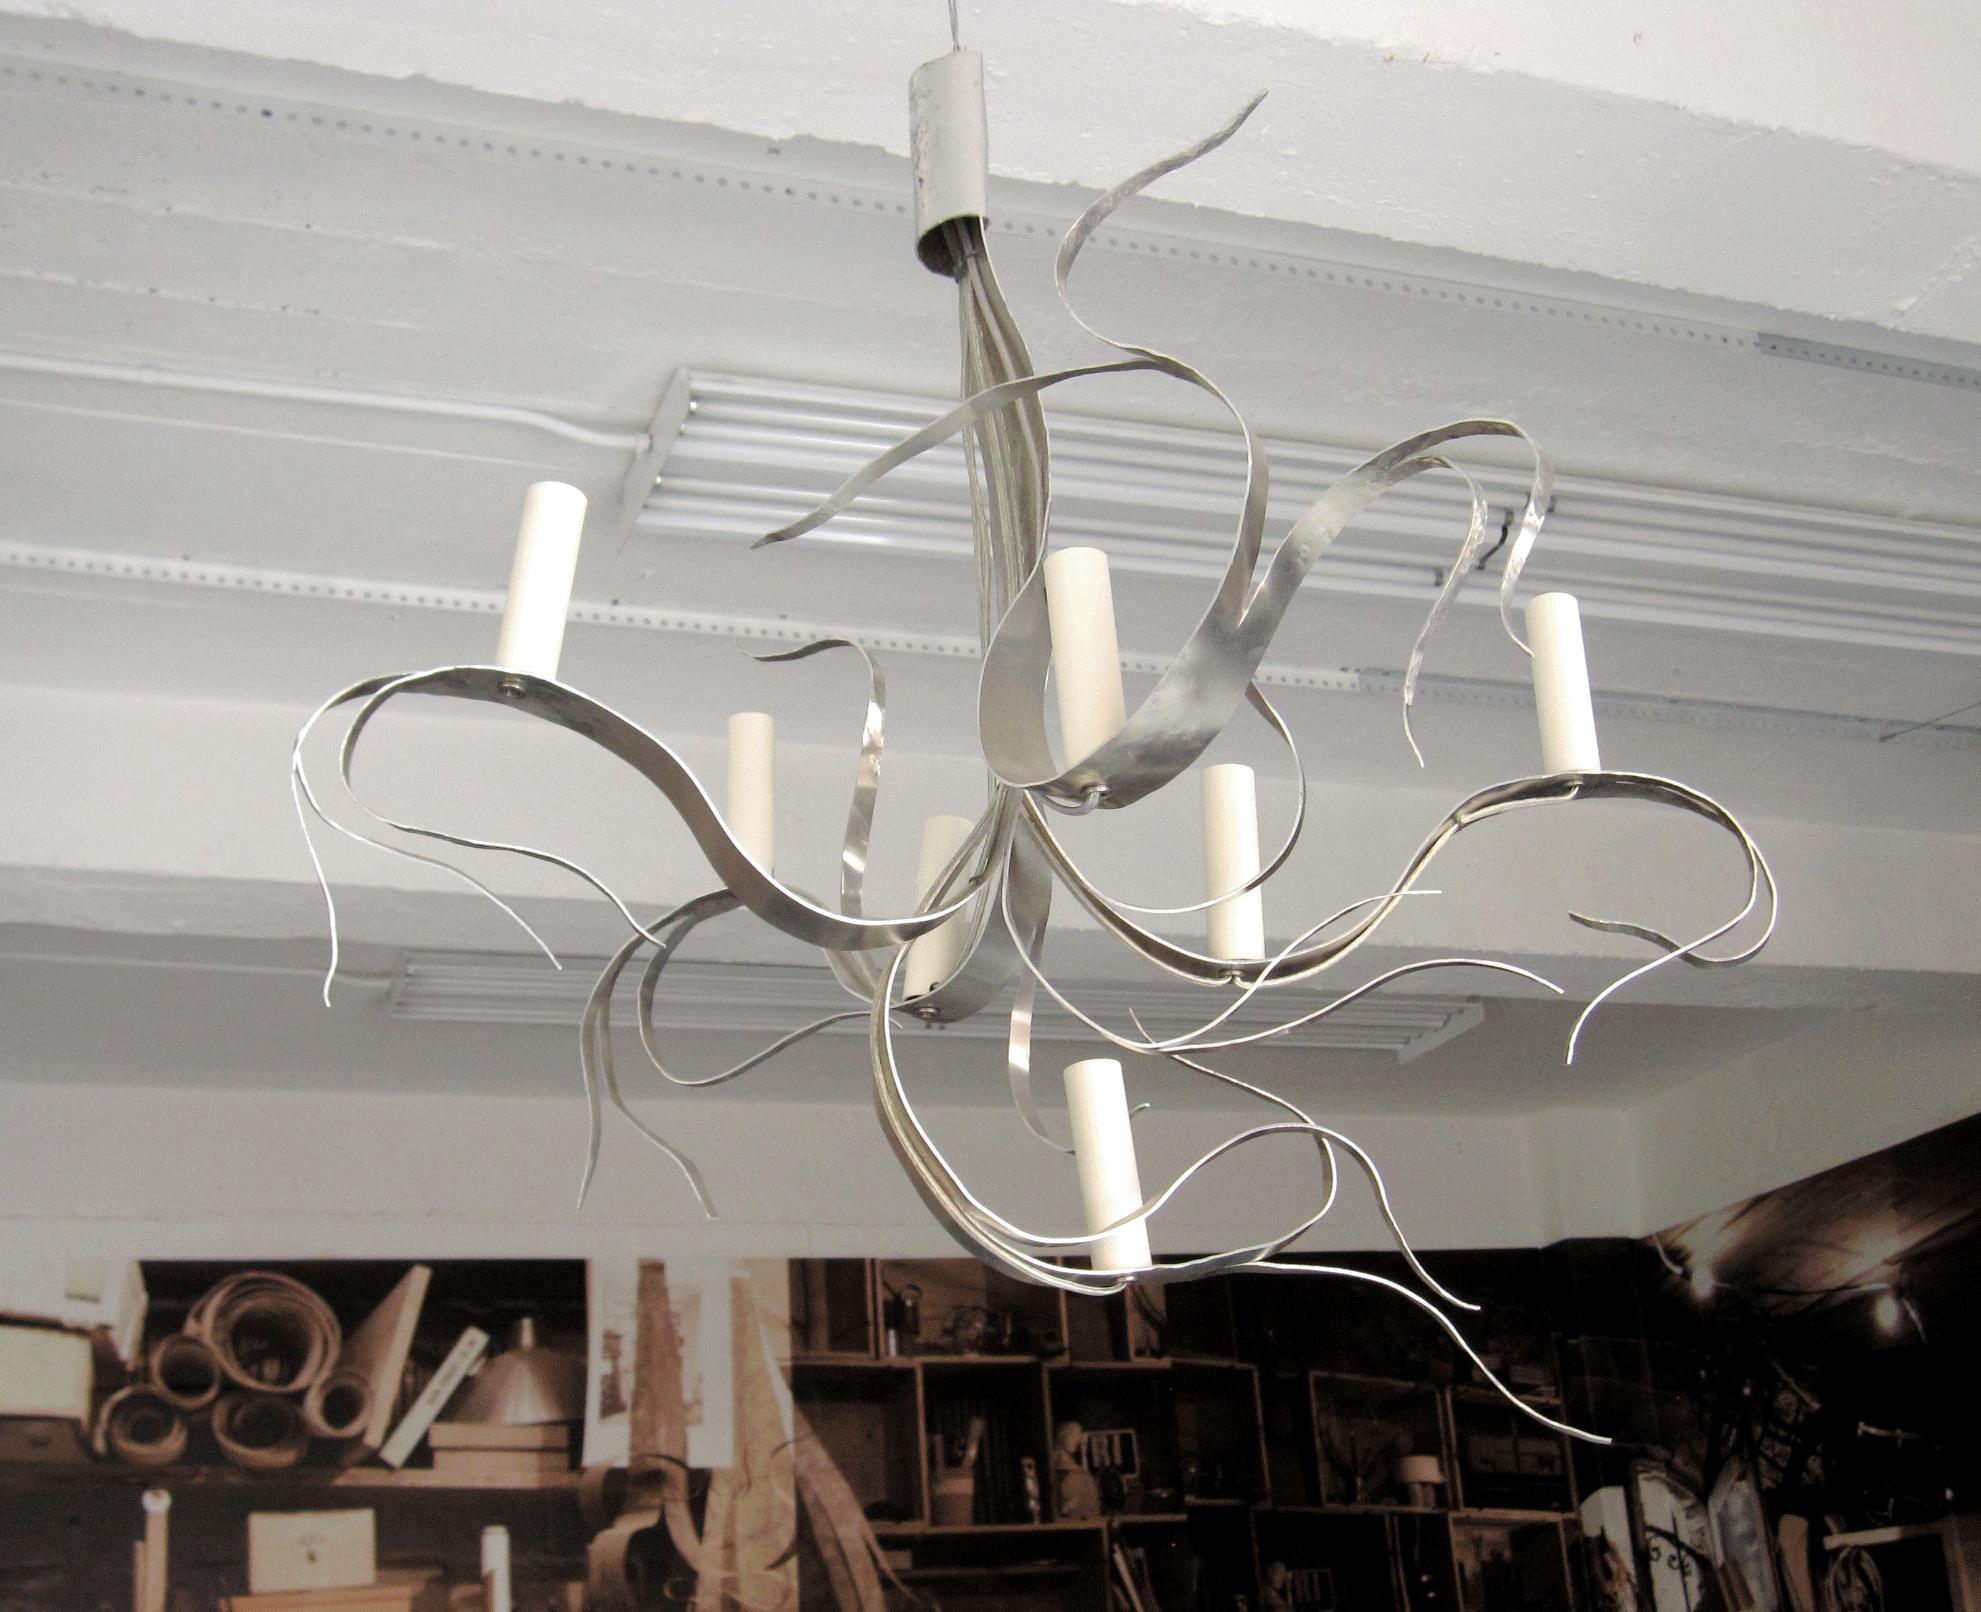 Inspired Karl Blossfeldt’s photographs of plants Jacques Jarrige cut from one sheet of aluminum without discarding any part this 7 light chandelier. Signed.